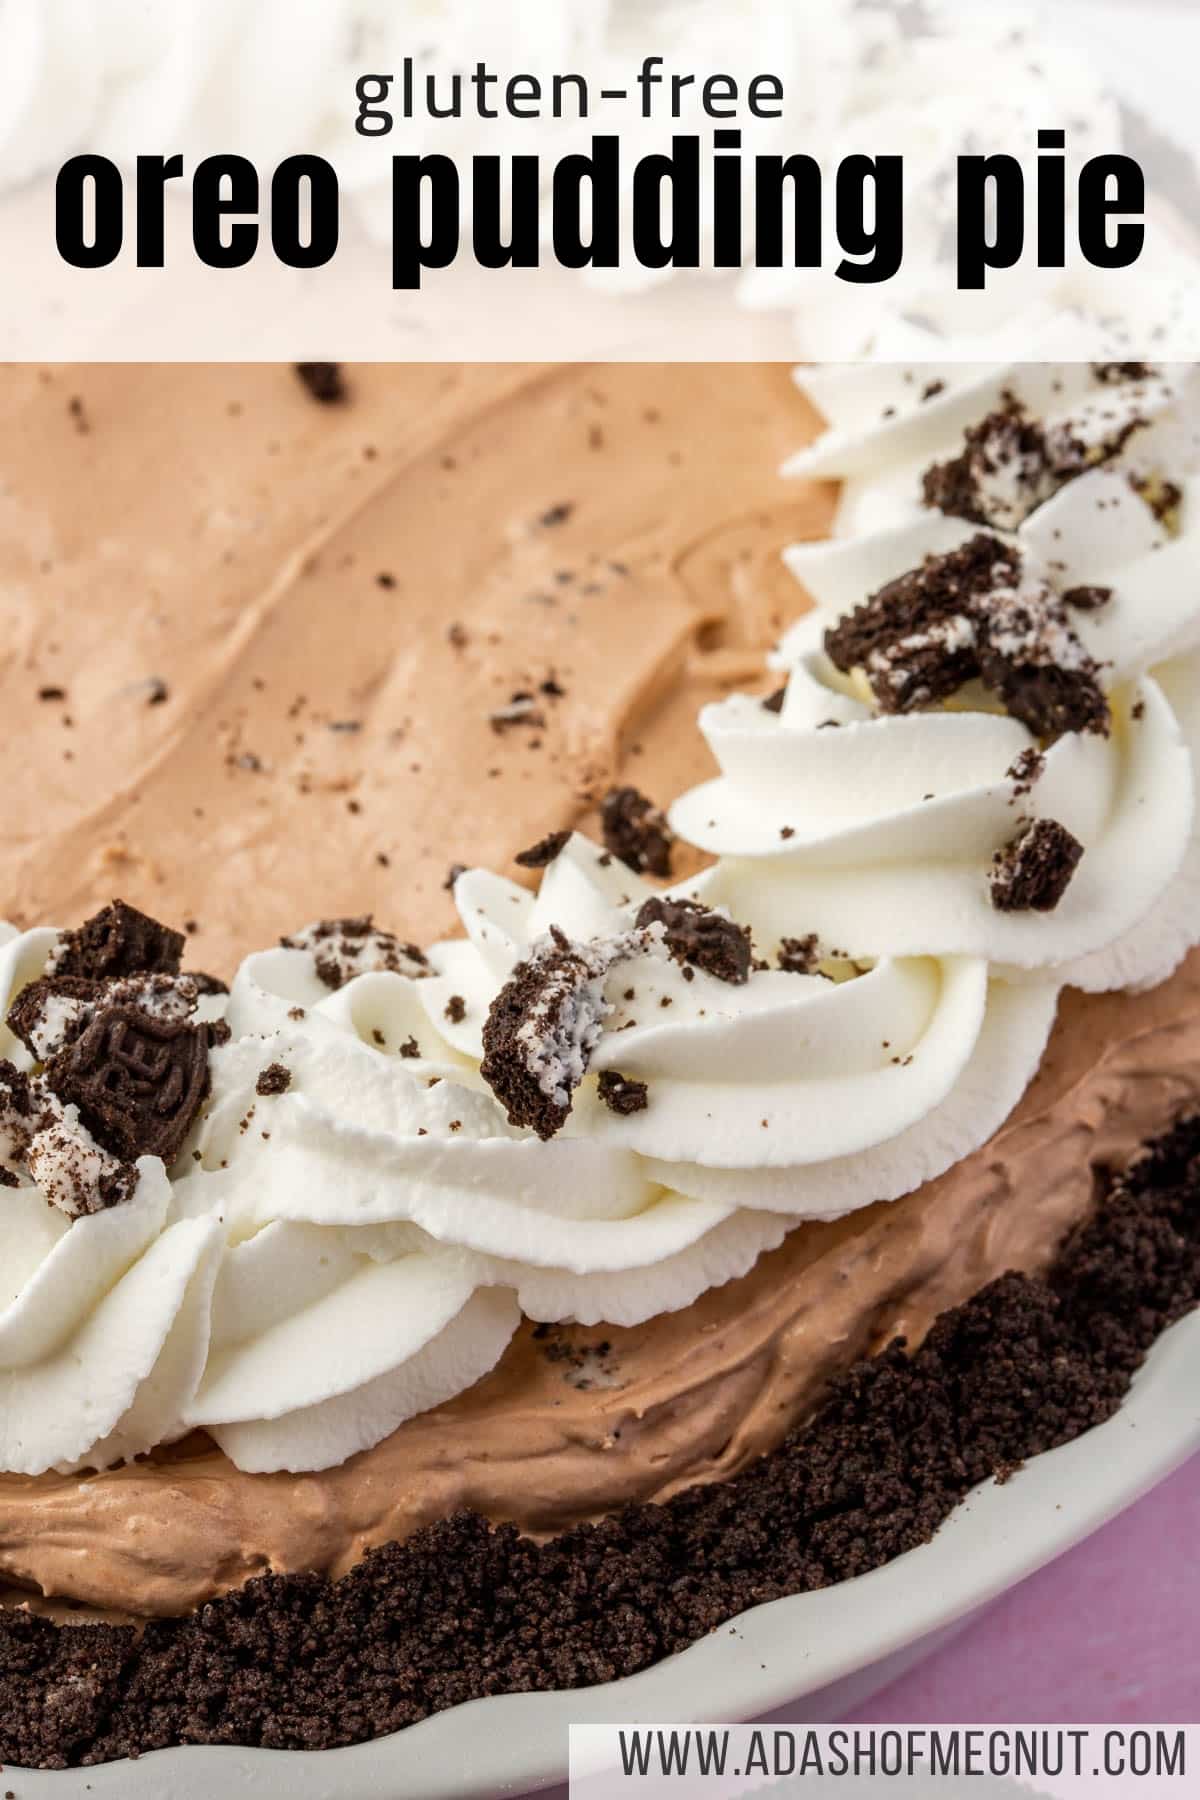 A close up of a gluten-free Oreo pudding pie topped with swirls of whipped cream and crushed Oreos.